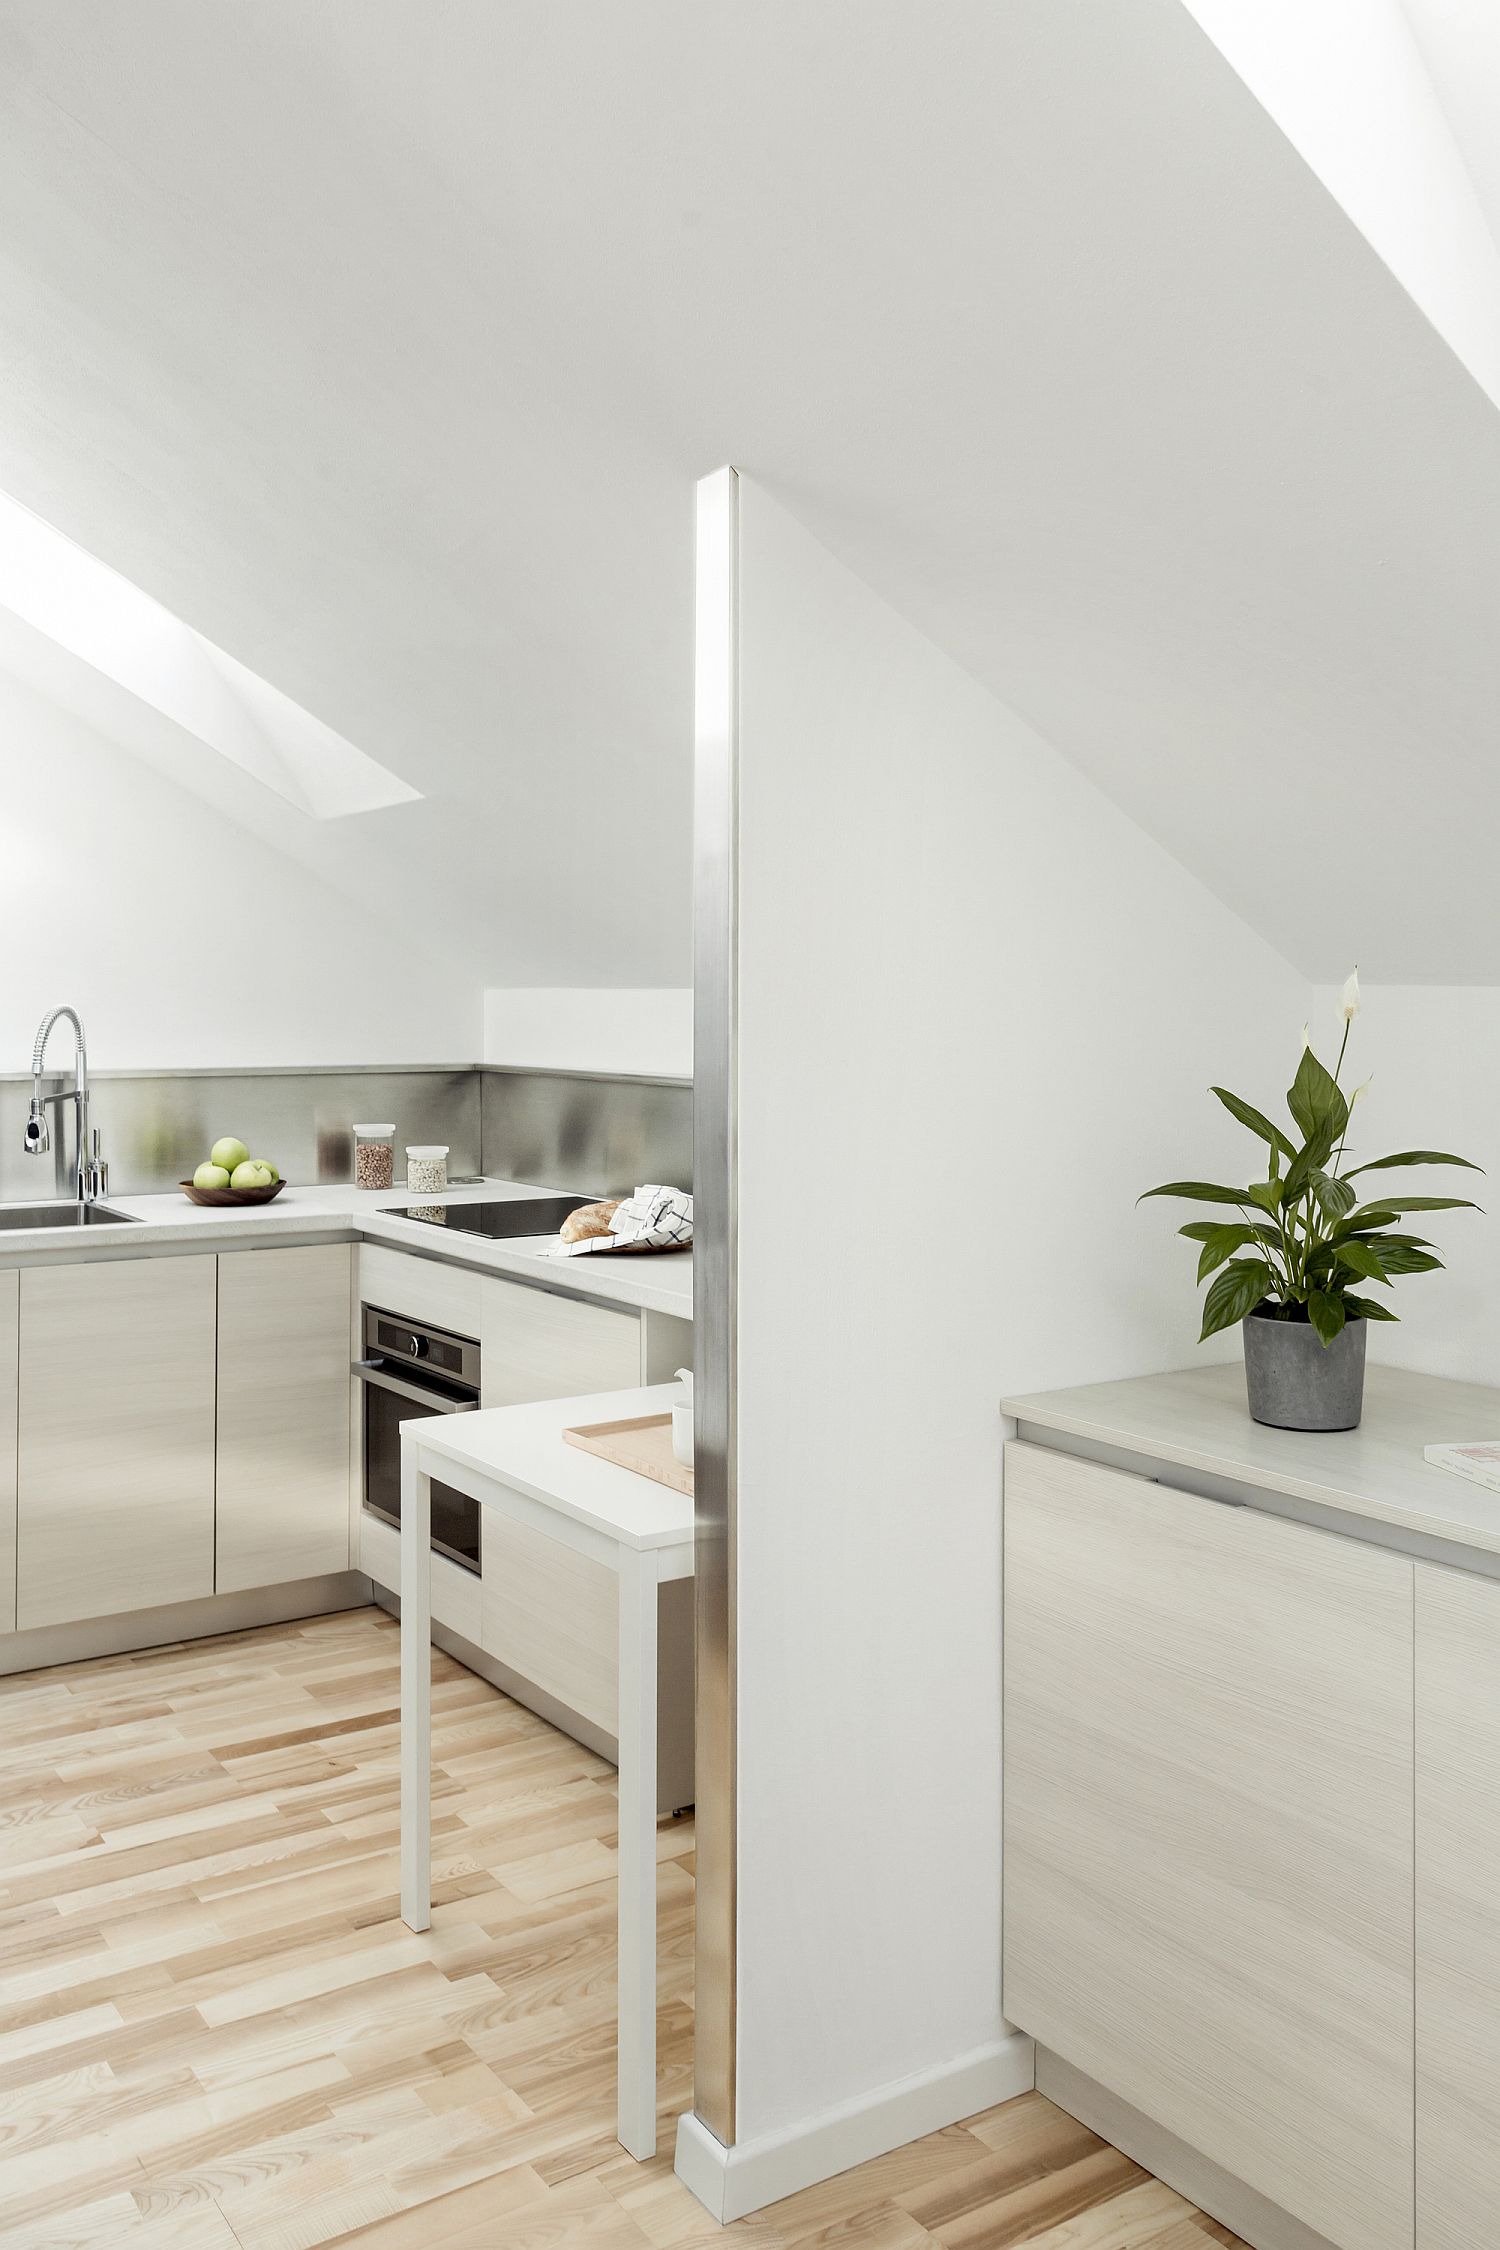 Kitchen-with-skylights-is-washed-in-plenty-of-natural-light